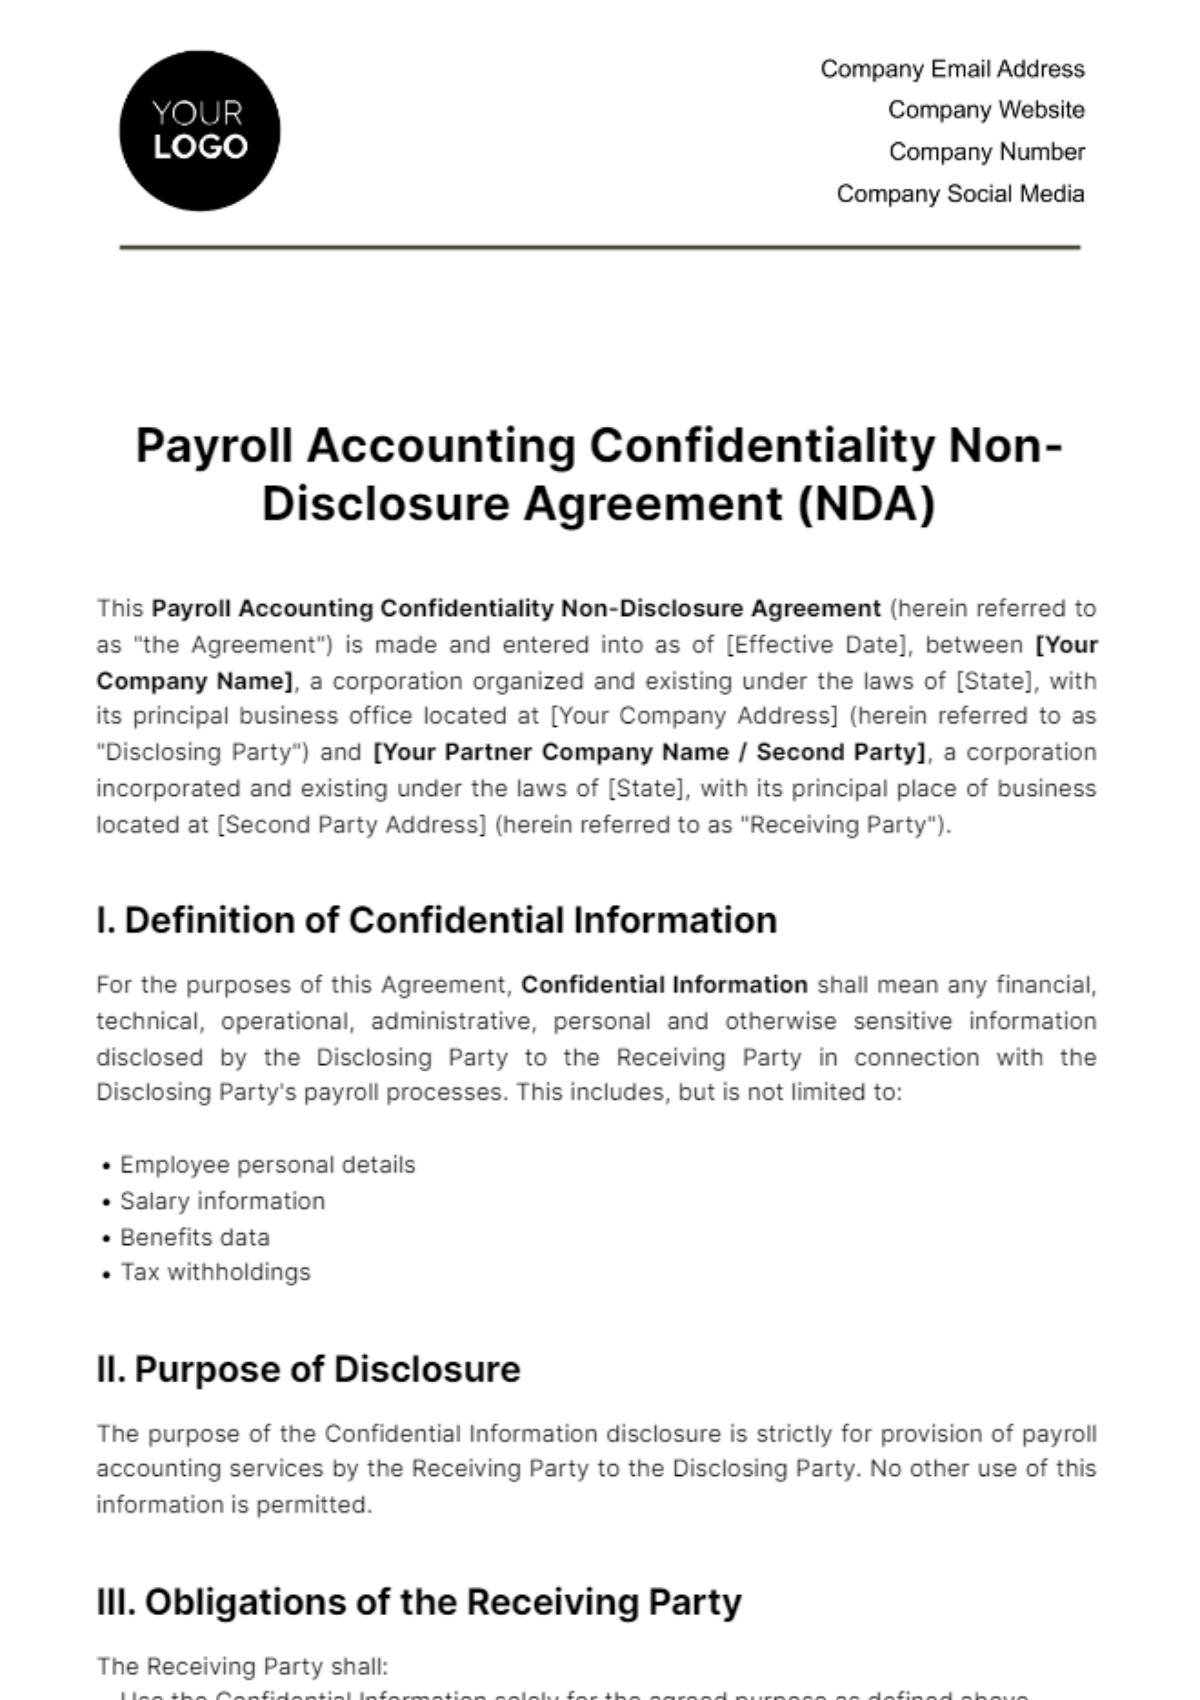 Payroll Accounting Confidentiality NDA Template